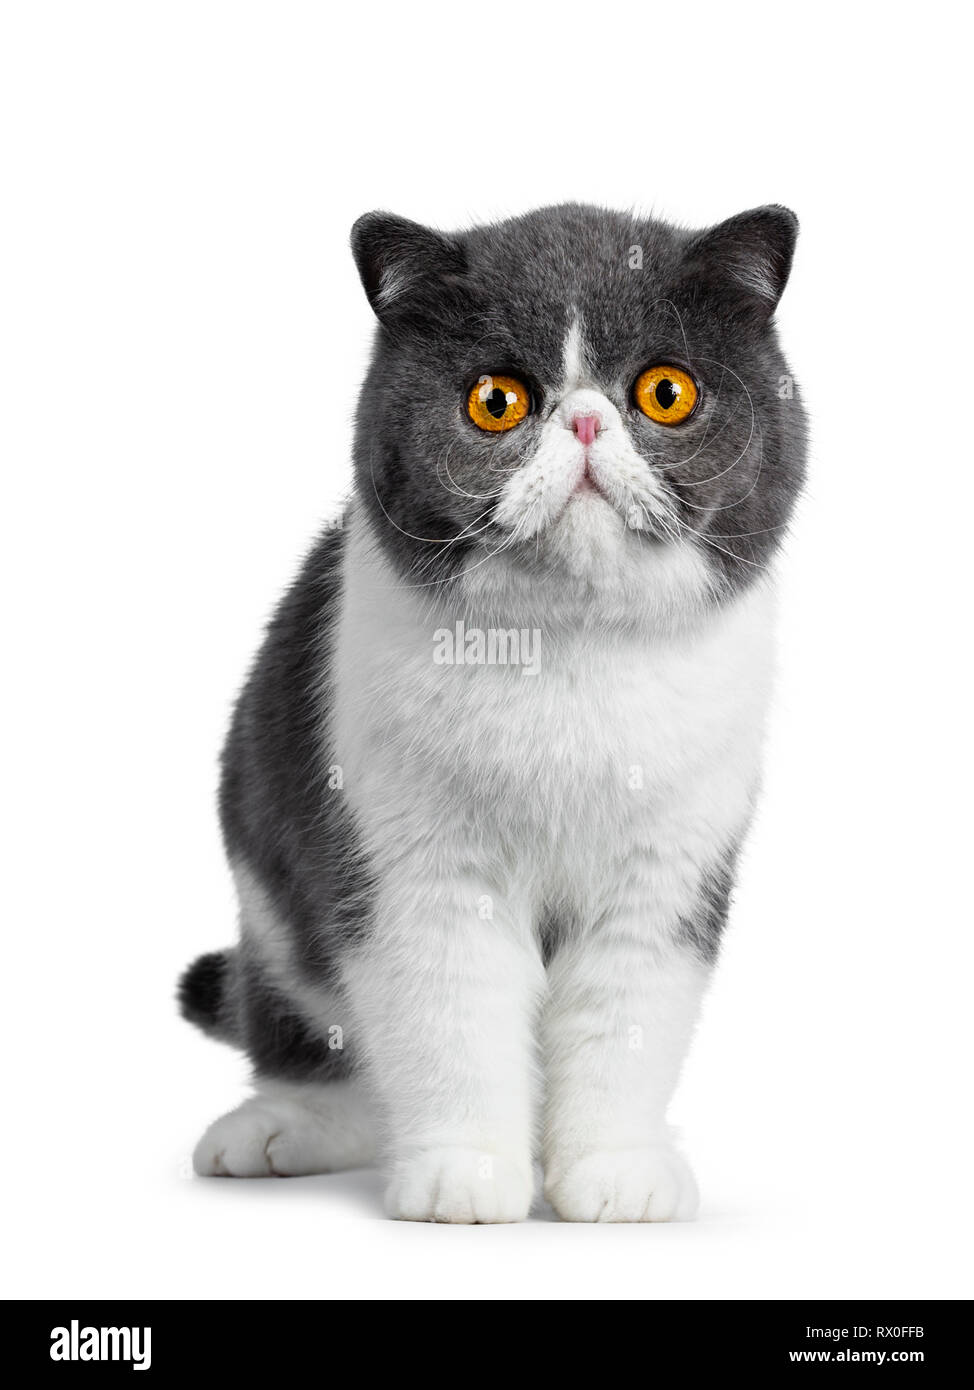 Cute blue with white young Exotic Shorthair cat, standing facing front. Looking curious straight into lens with amazing round orange eyes. Isolated on Stock Photo